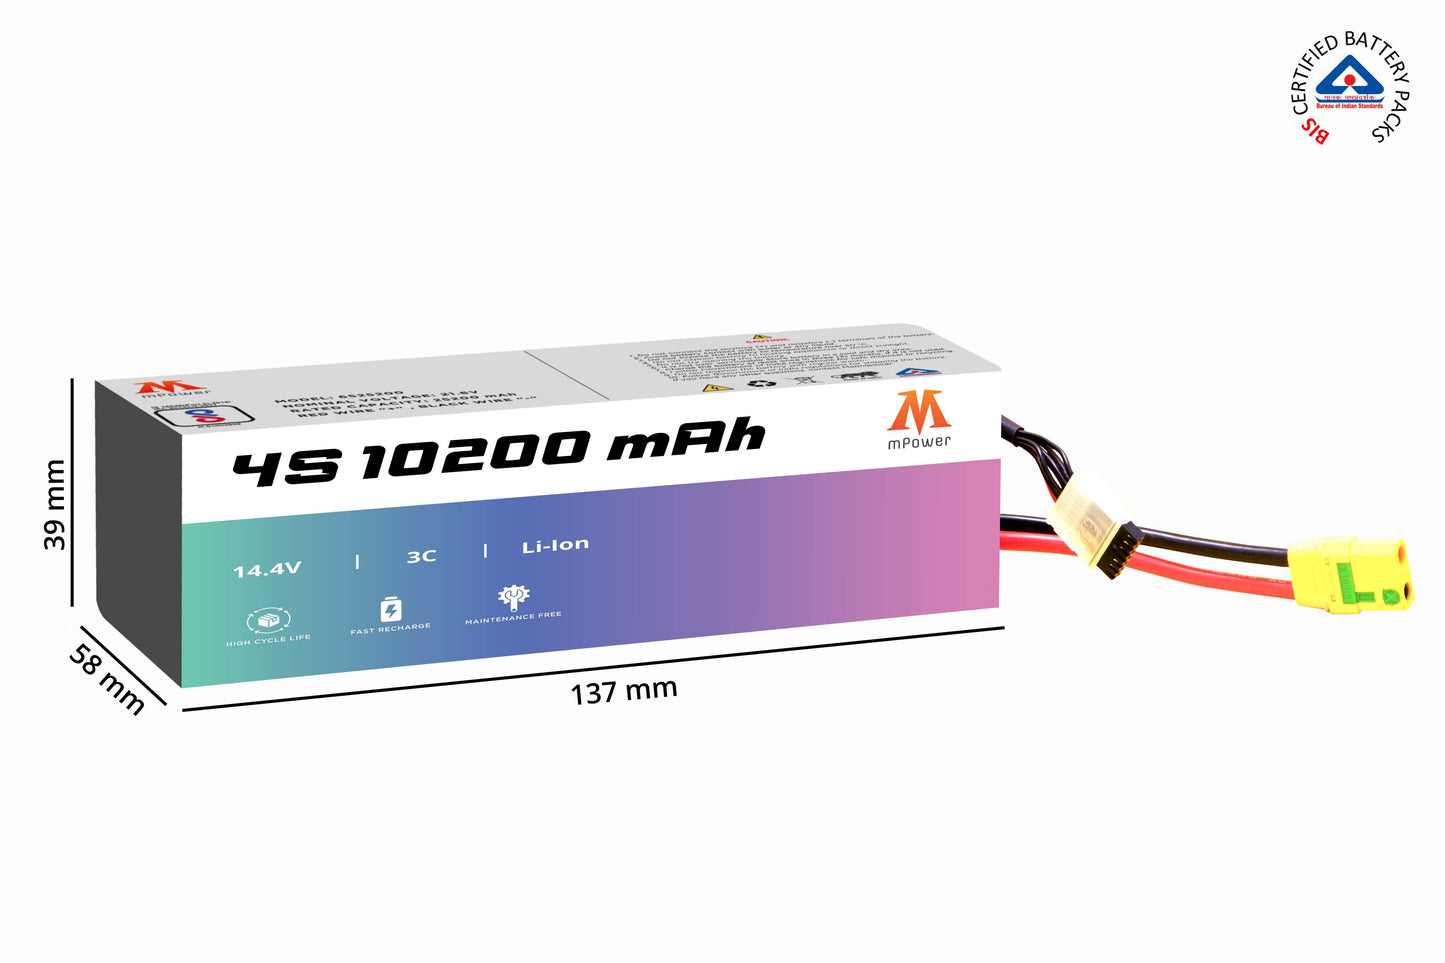 mPower 4S 10200mAh Lithium-Ion Battery for Survey Drones-mpowerlithium